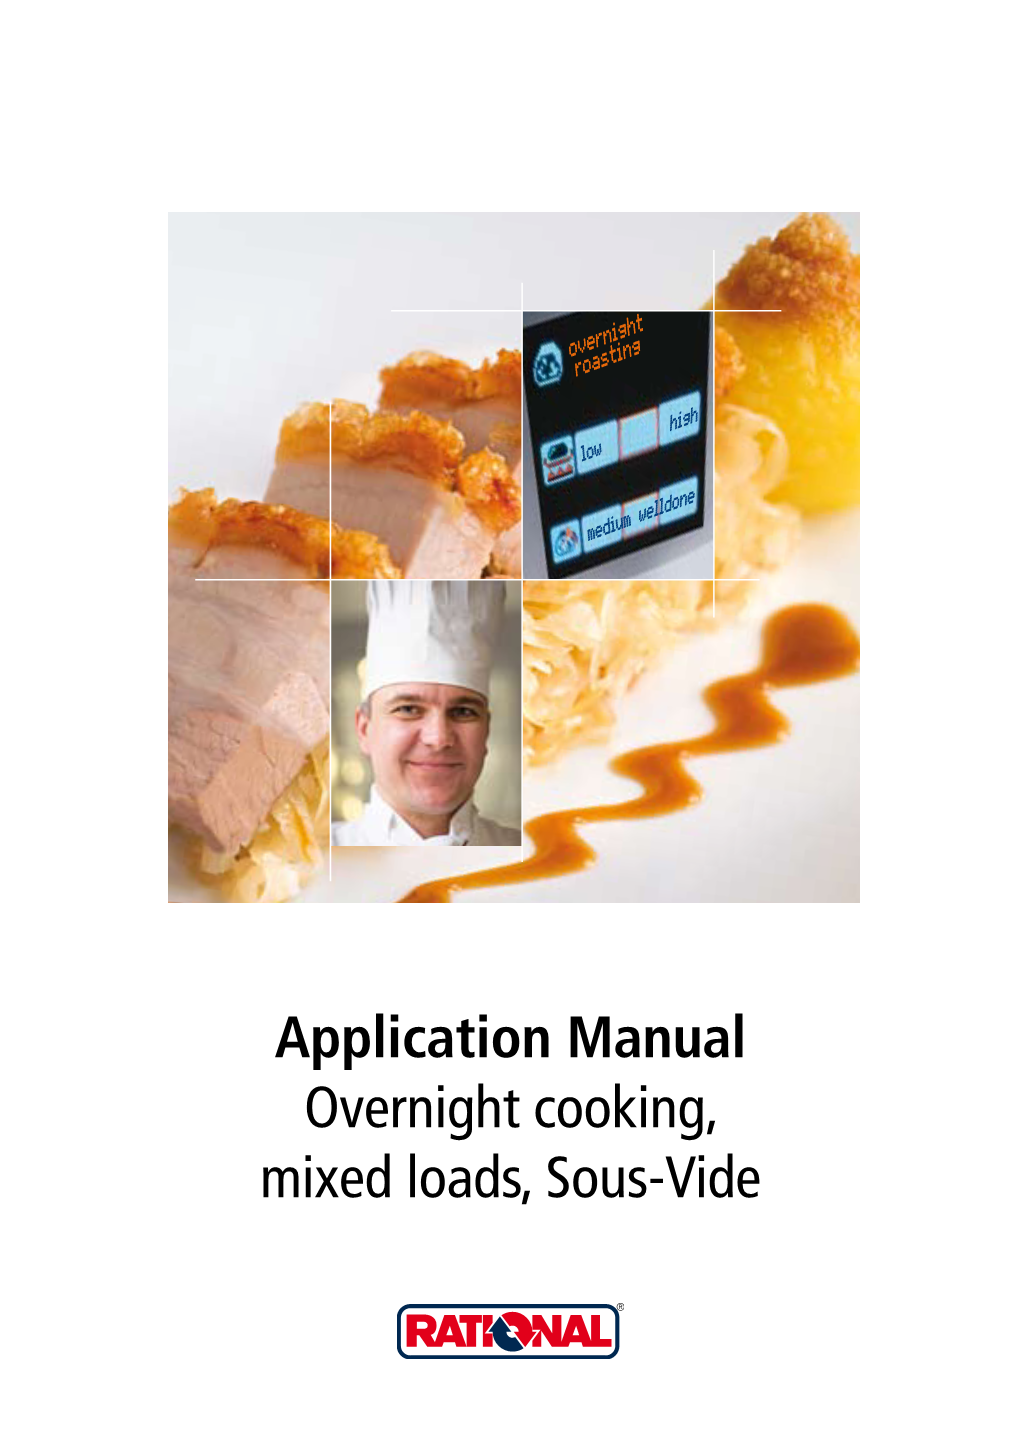 Application Manual Overnight Cooking, Mixed Loads, Sous-Vide